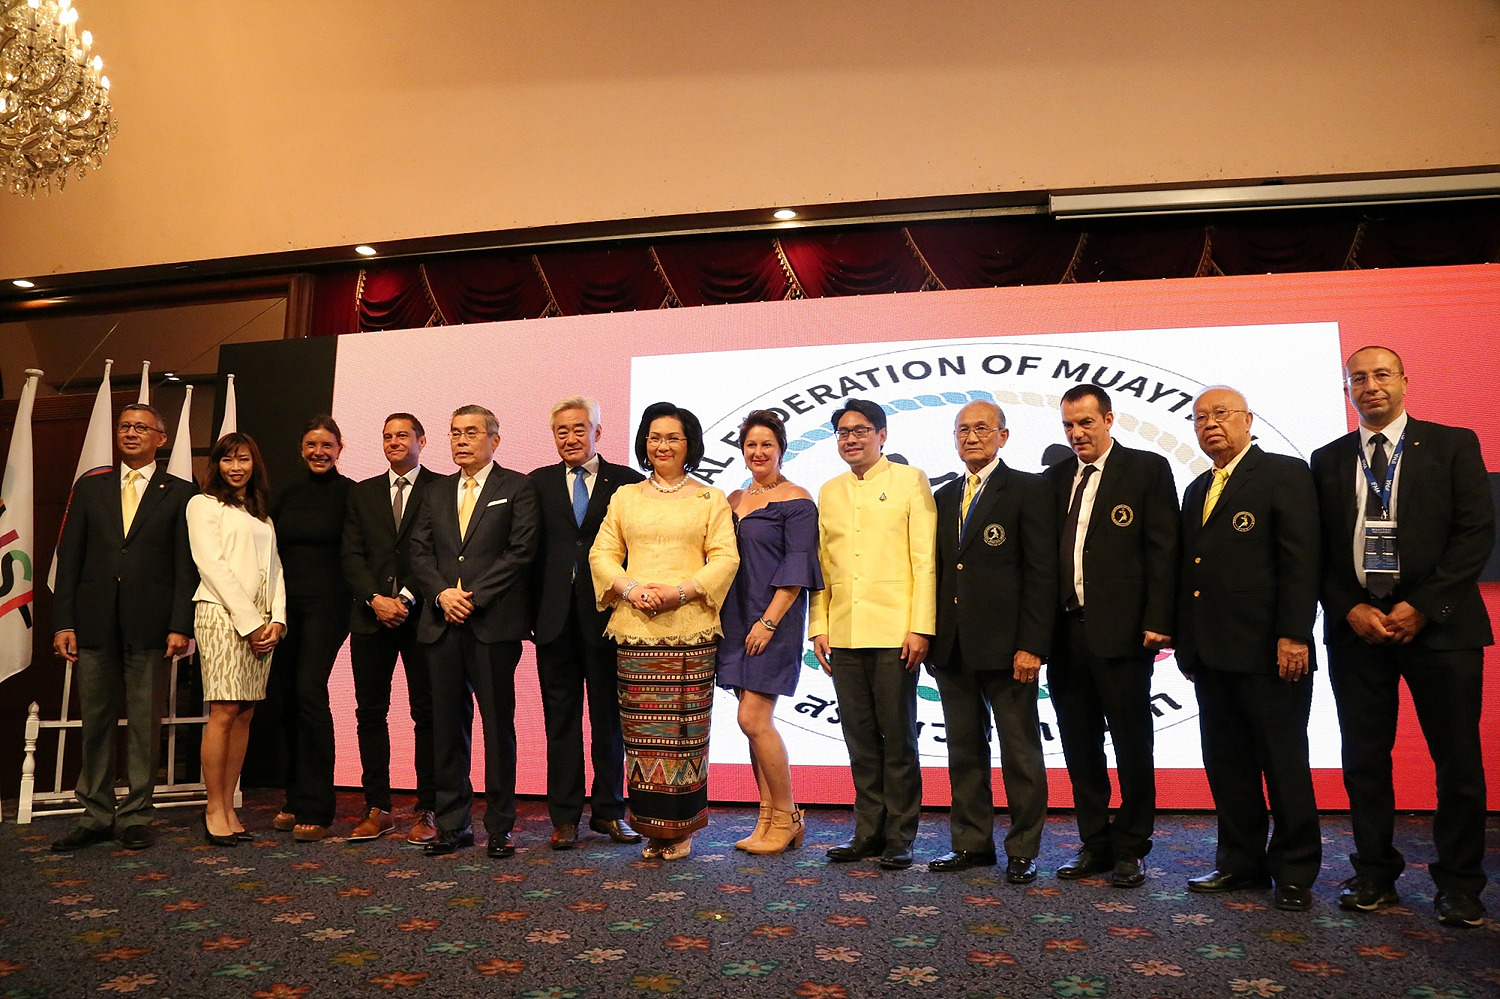 20190727-Group photos during IFMA General Assembly